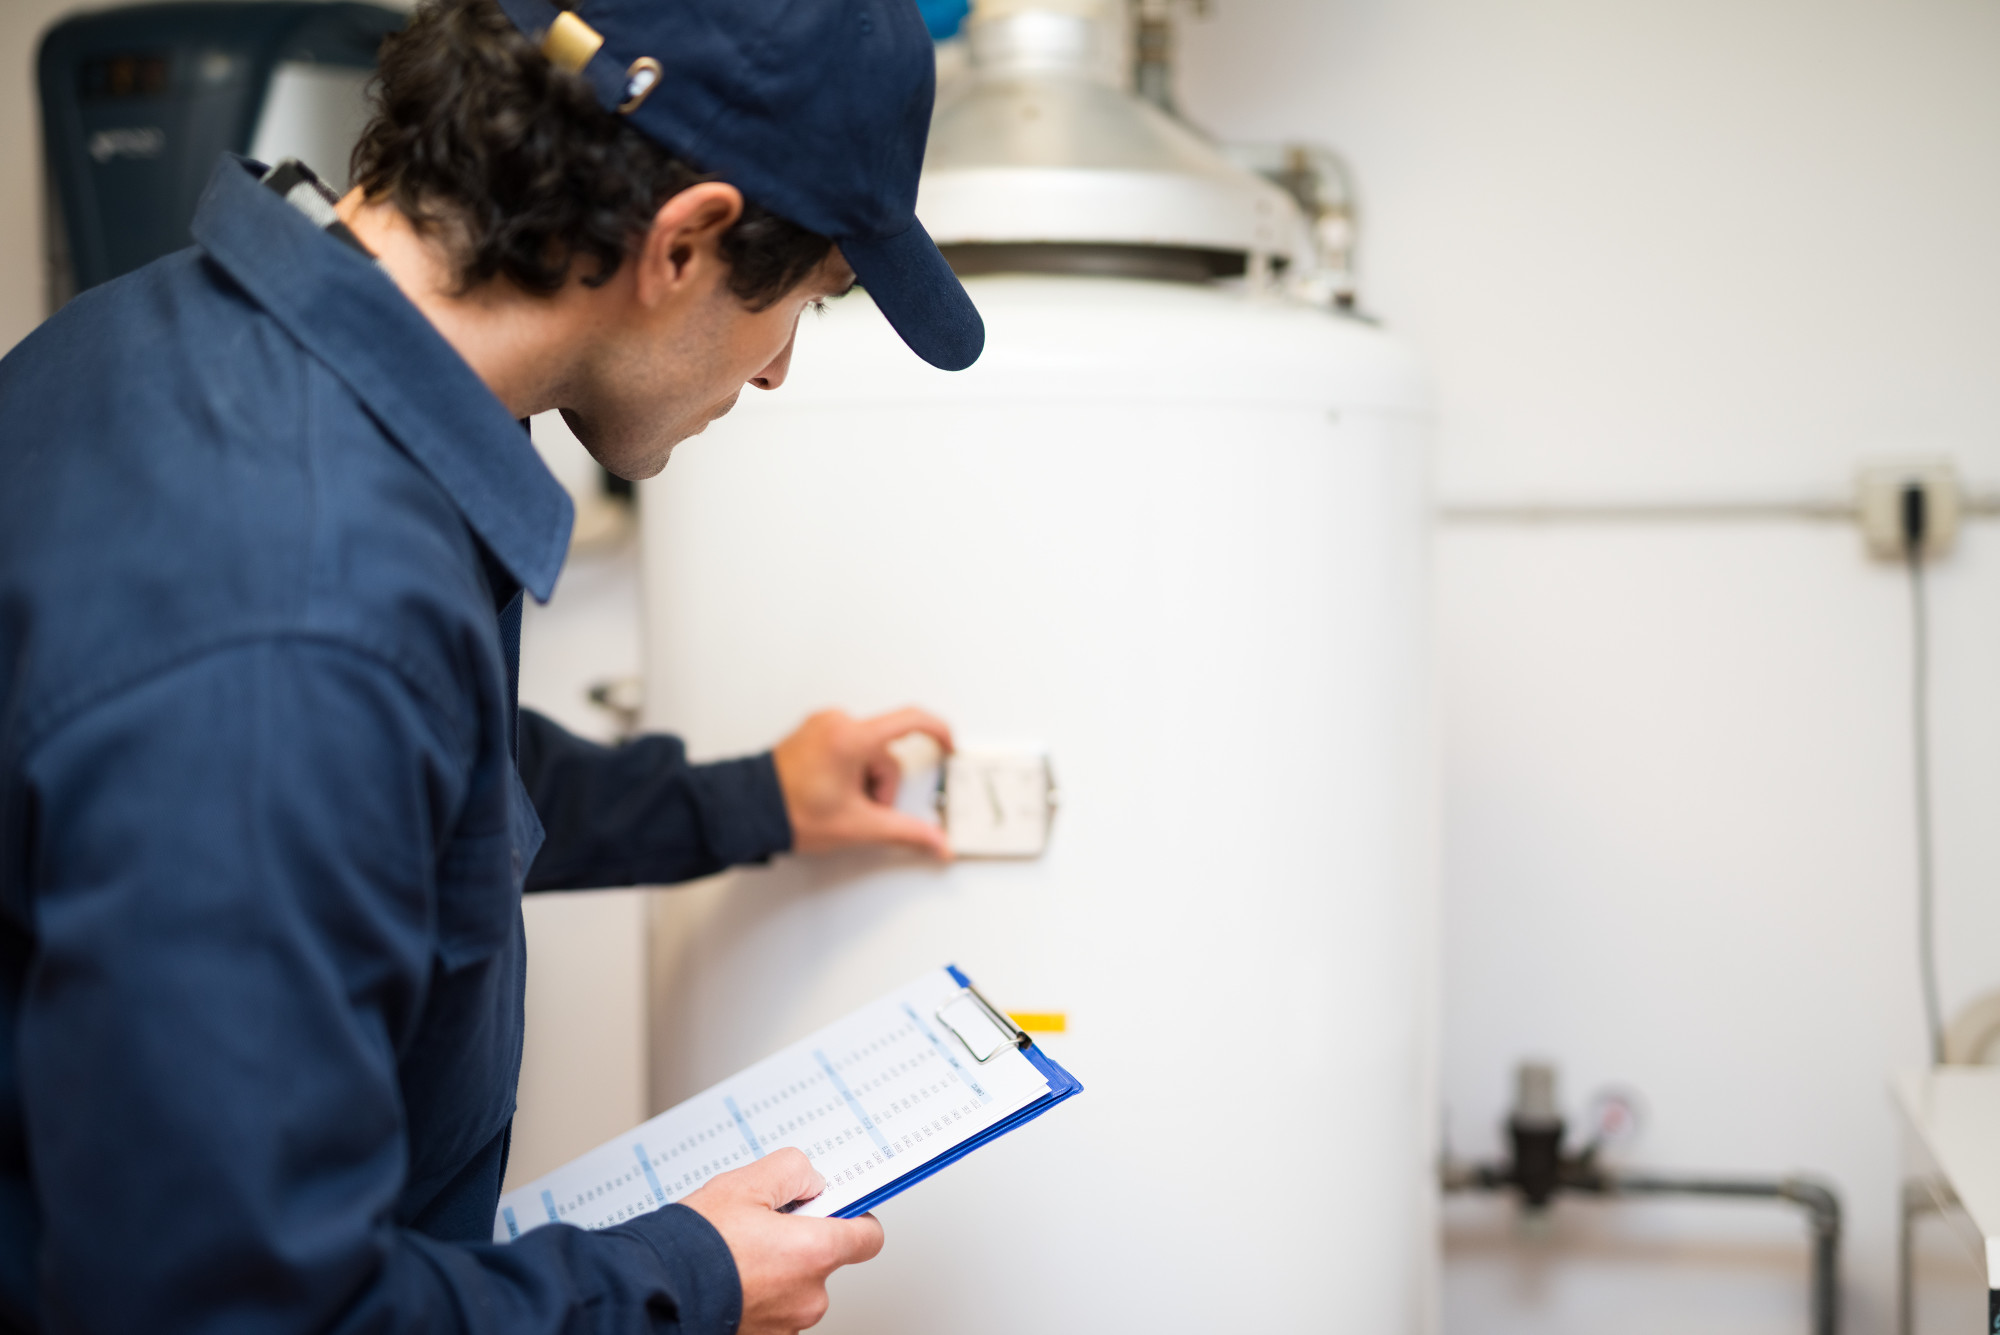 When it comes to water heater repair, you should know the prices you can expect to pay. Smash that link to learn more about the average cost.